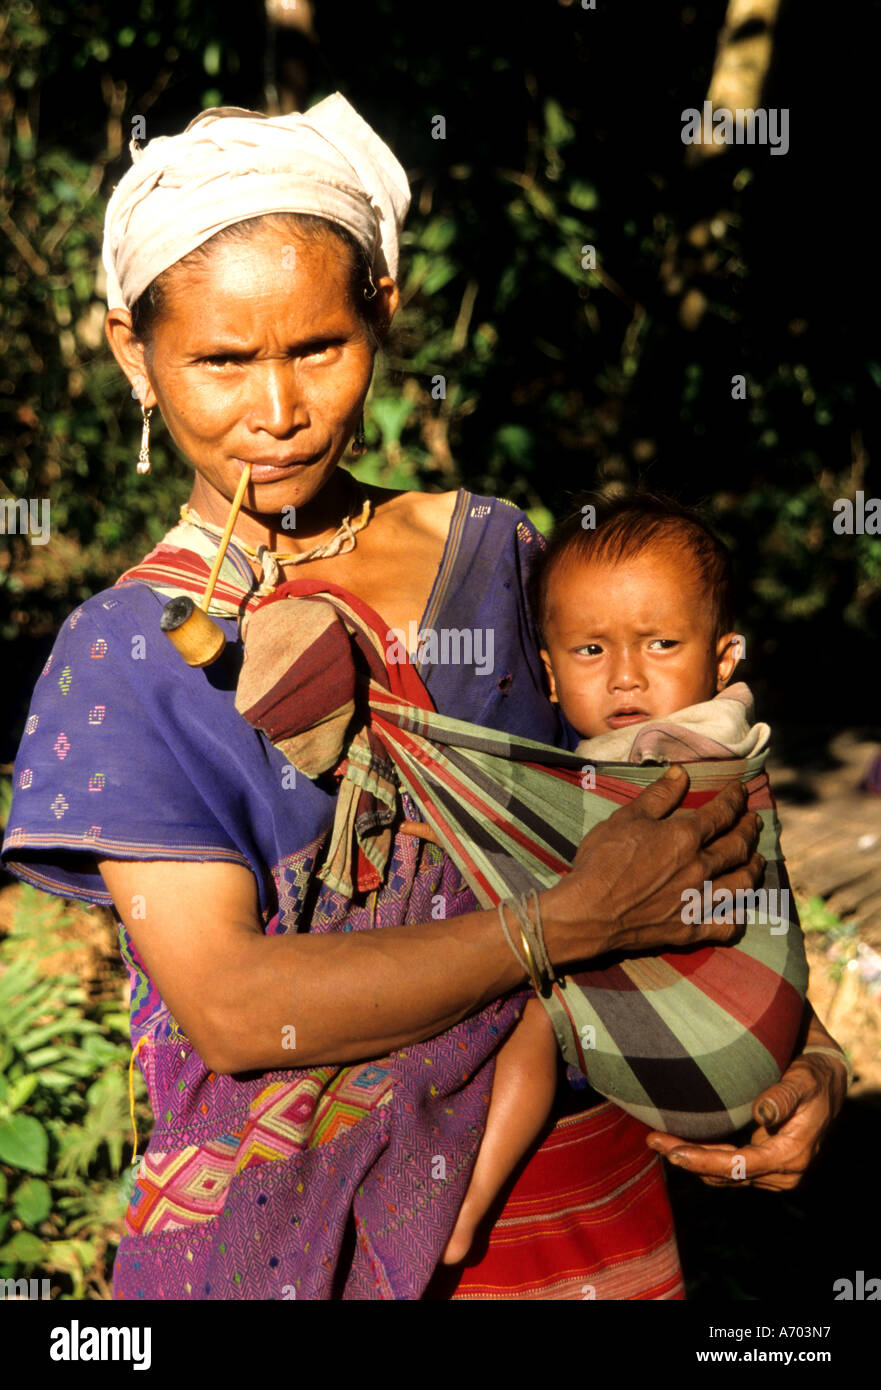 Woman pipe baby Thailand Chiang Mai hilltribe hill tribe drugs drug opium, Stock Photo